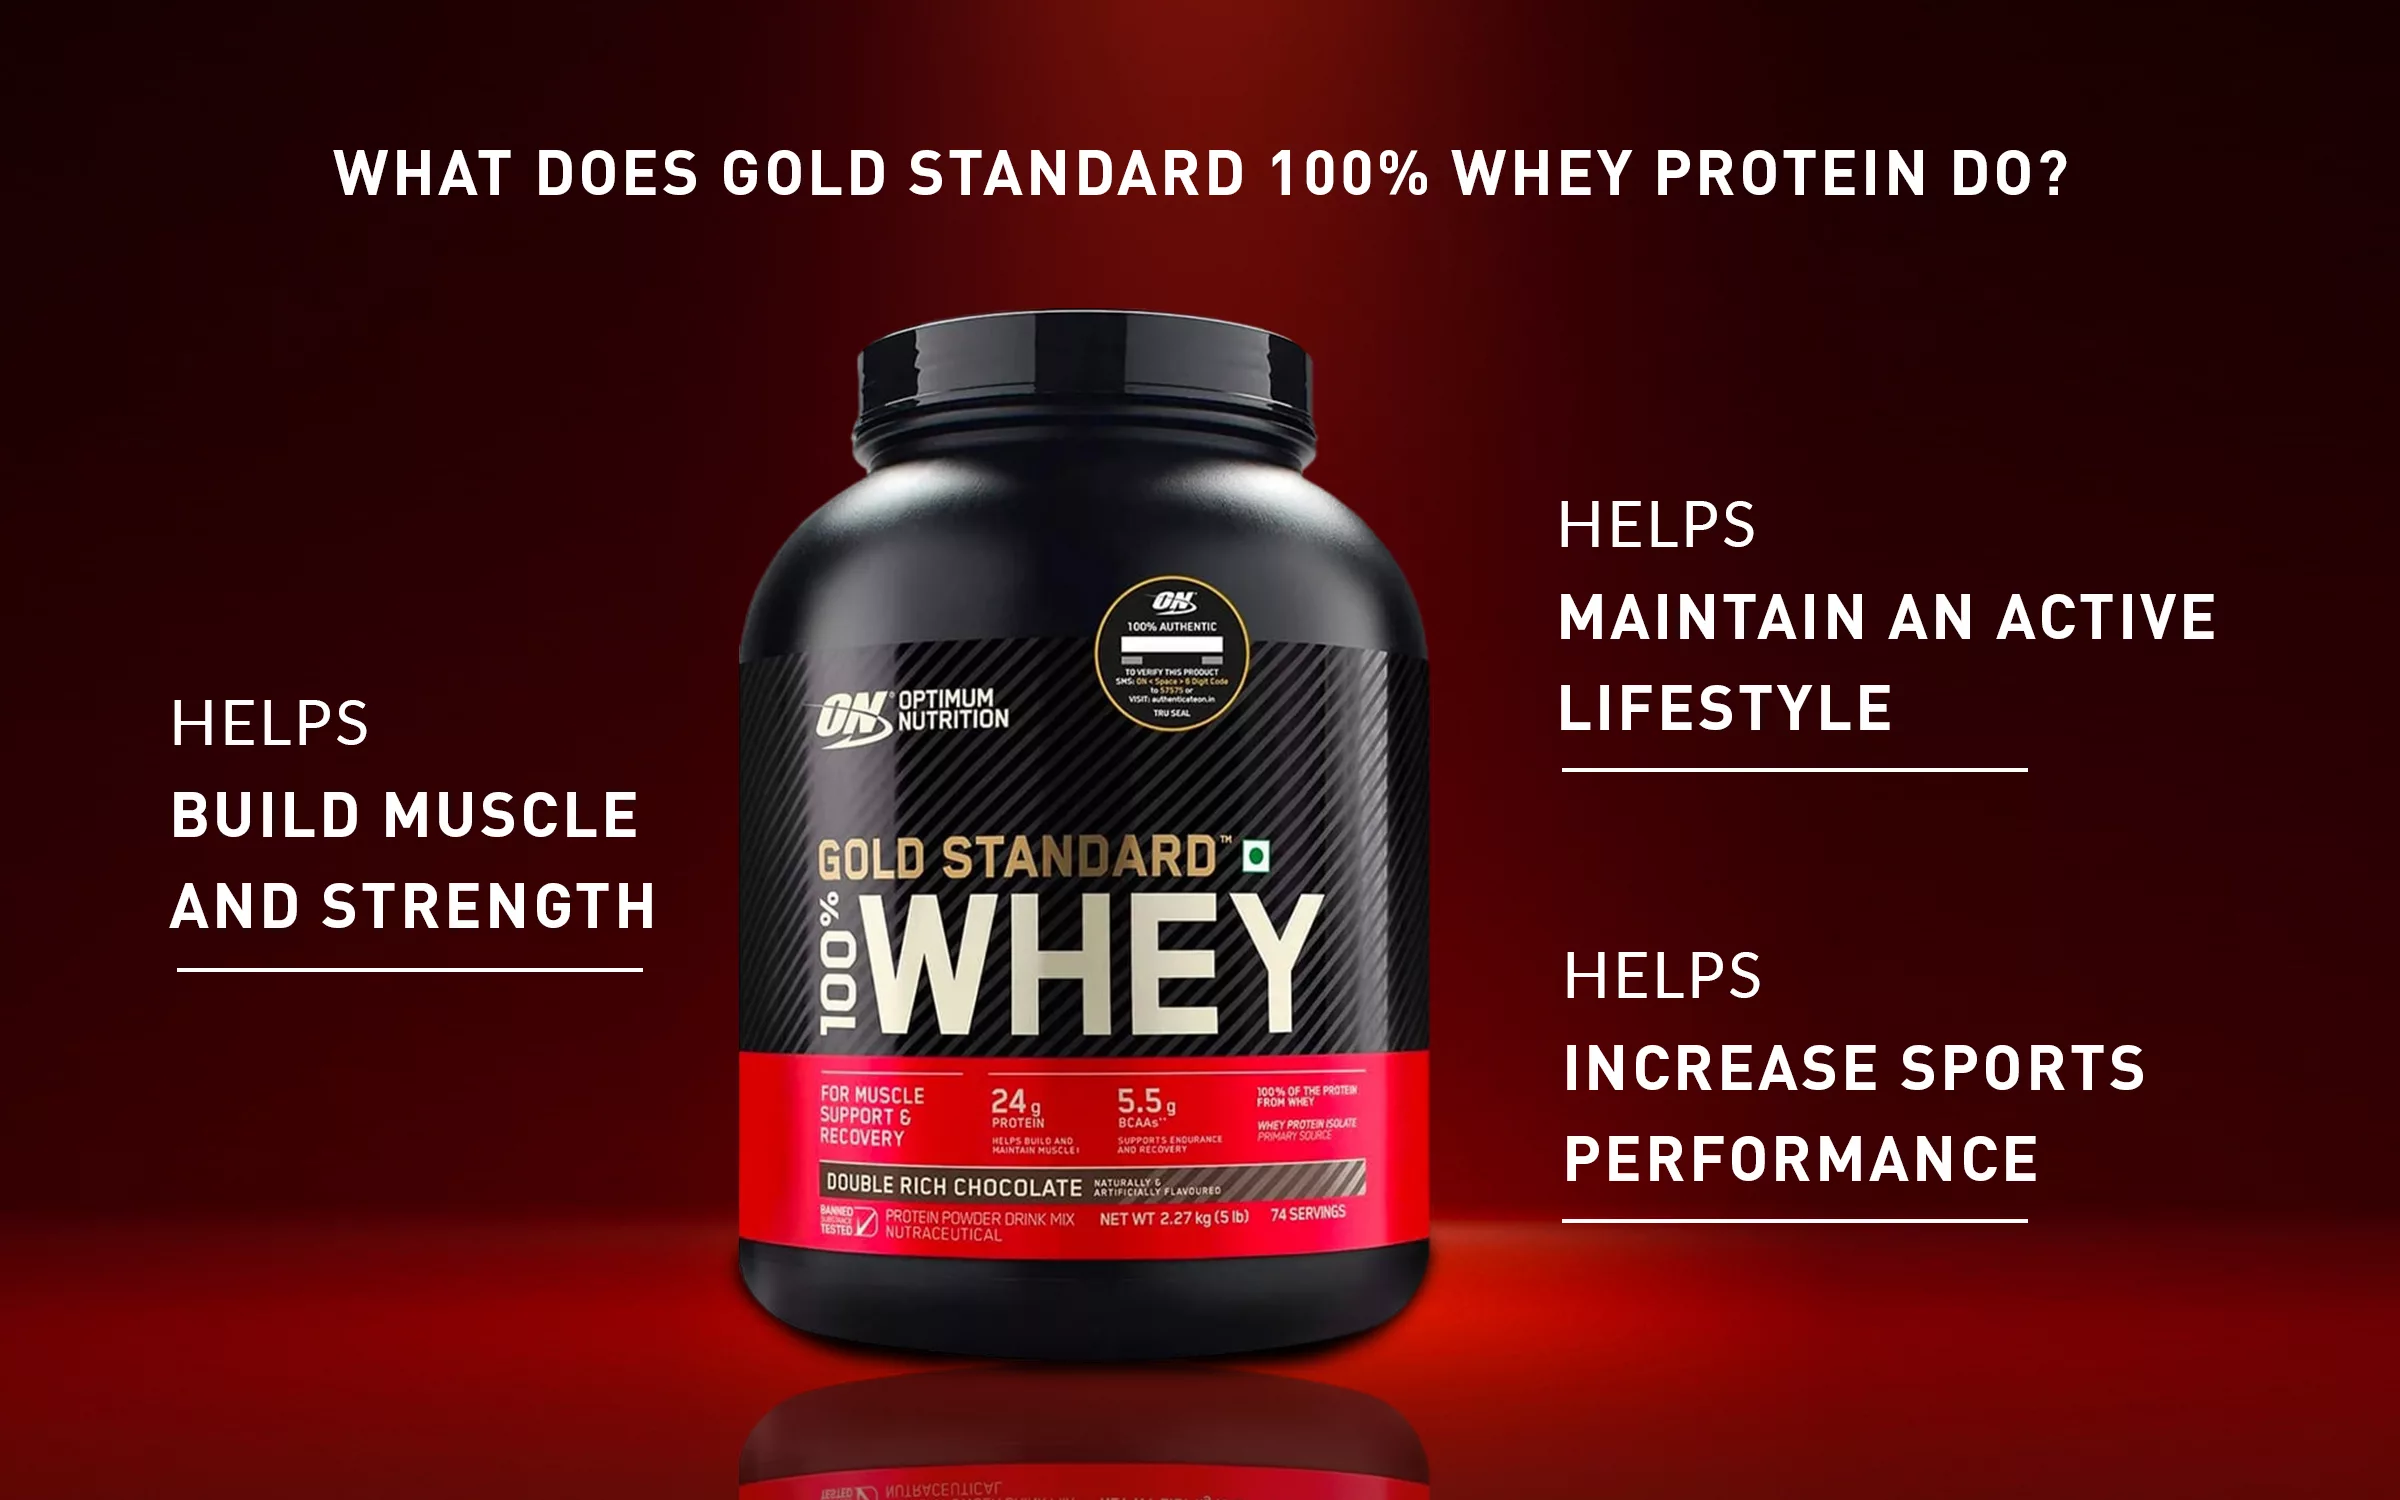 What Does Optimum Nutrition Gold Standard 100% Whey Protein Do?